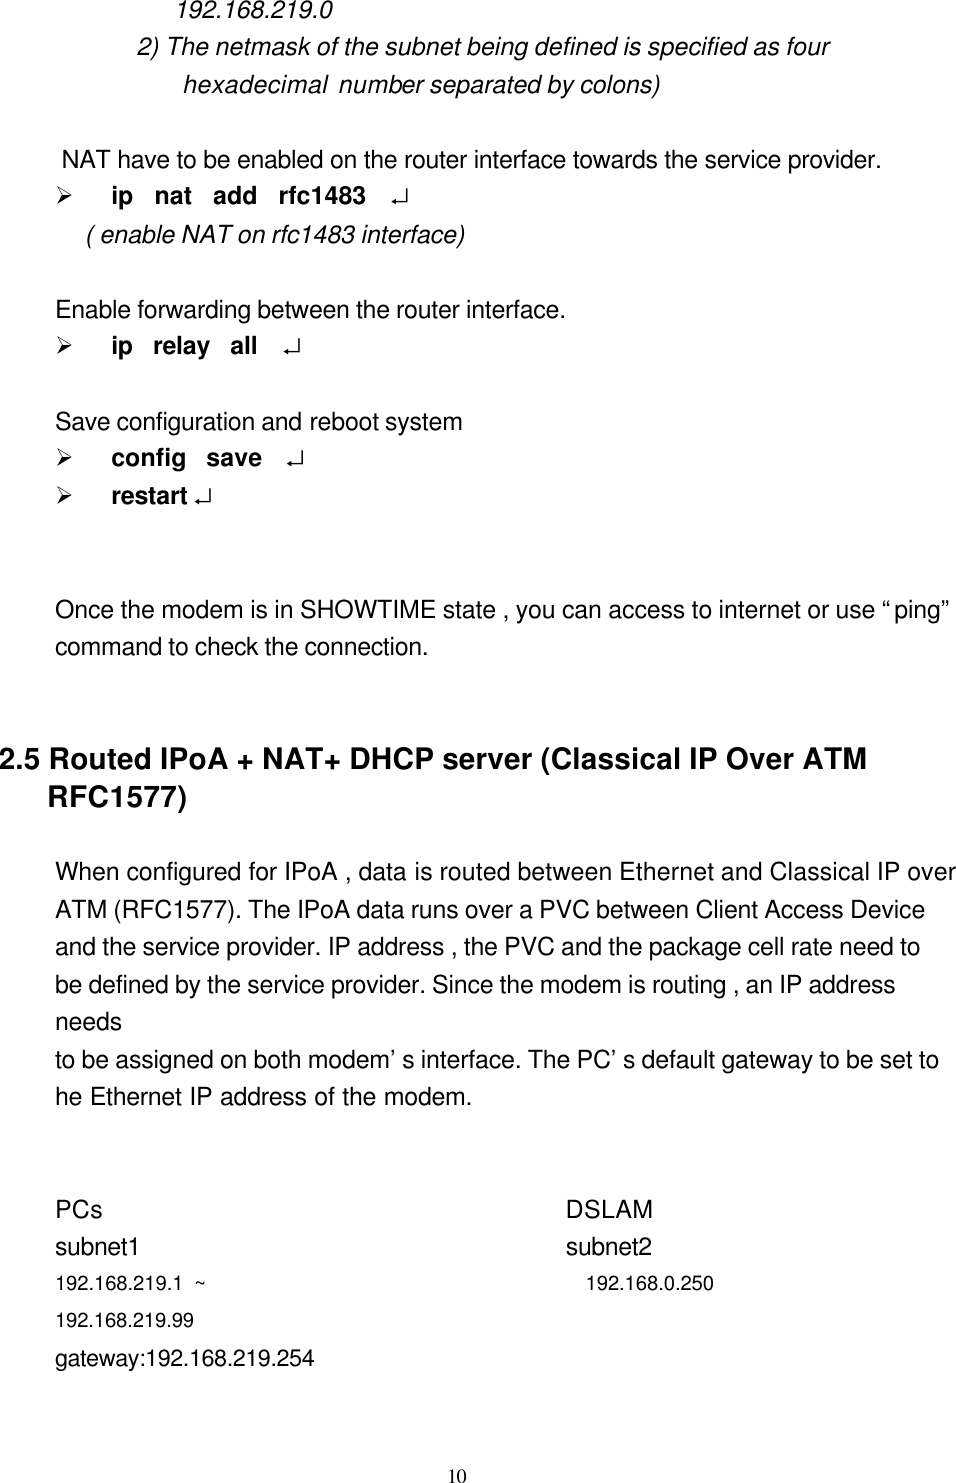  10 192.168.219.0 2) The netmask of the subnet being defined is specified as four     hexadecimal number separated by colons)   NAT have to be enabled on the router interface towards the service provider. Ø ip  nat  add  rfc1483  ↵    ( enable NAT on rfc1483 interface)    Enable forwarding between the router interface. Ø ip  relay  all   ↵  Save configuration and reboot system Ø config  save  ↵ Ø restart ↵   Once the modem is in SHOWTIME state , you can access to internet or use “ping” command to check the connection.   2.5 Routed IPoA + NAT+ DHCP server (Classical IP Over ATM RFC1577)  When configured for IPoA , data is routed between Ethernet and Classical IP over   ATM (RFC1577). The IPoA data runs over a PVC between Client Access Device   and the service provider. IP address , the PVC and the package cell rate need to be defined by the service provider. Since the modem is routing , an IP address needs   to be assigned on both modem’s interface. The PC’s default gateway to be set to   he Ethernet IP address of the modem.             PCs                                     DSLAM        subnet1                                  subnet2                                192.168.219.1 ~                                   192.168.0.250               192.168.219.99 gateway:192.168.219.254                                             